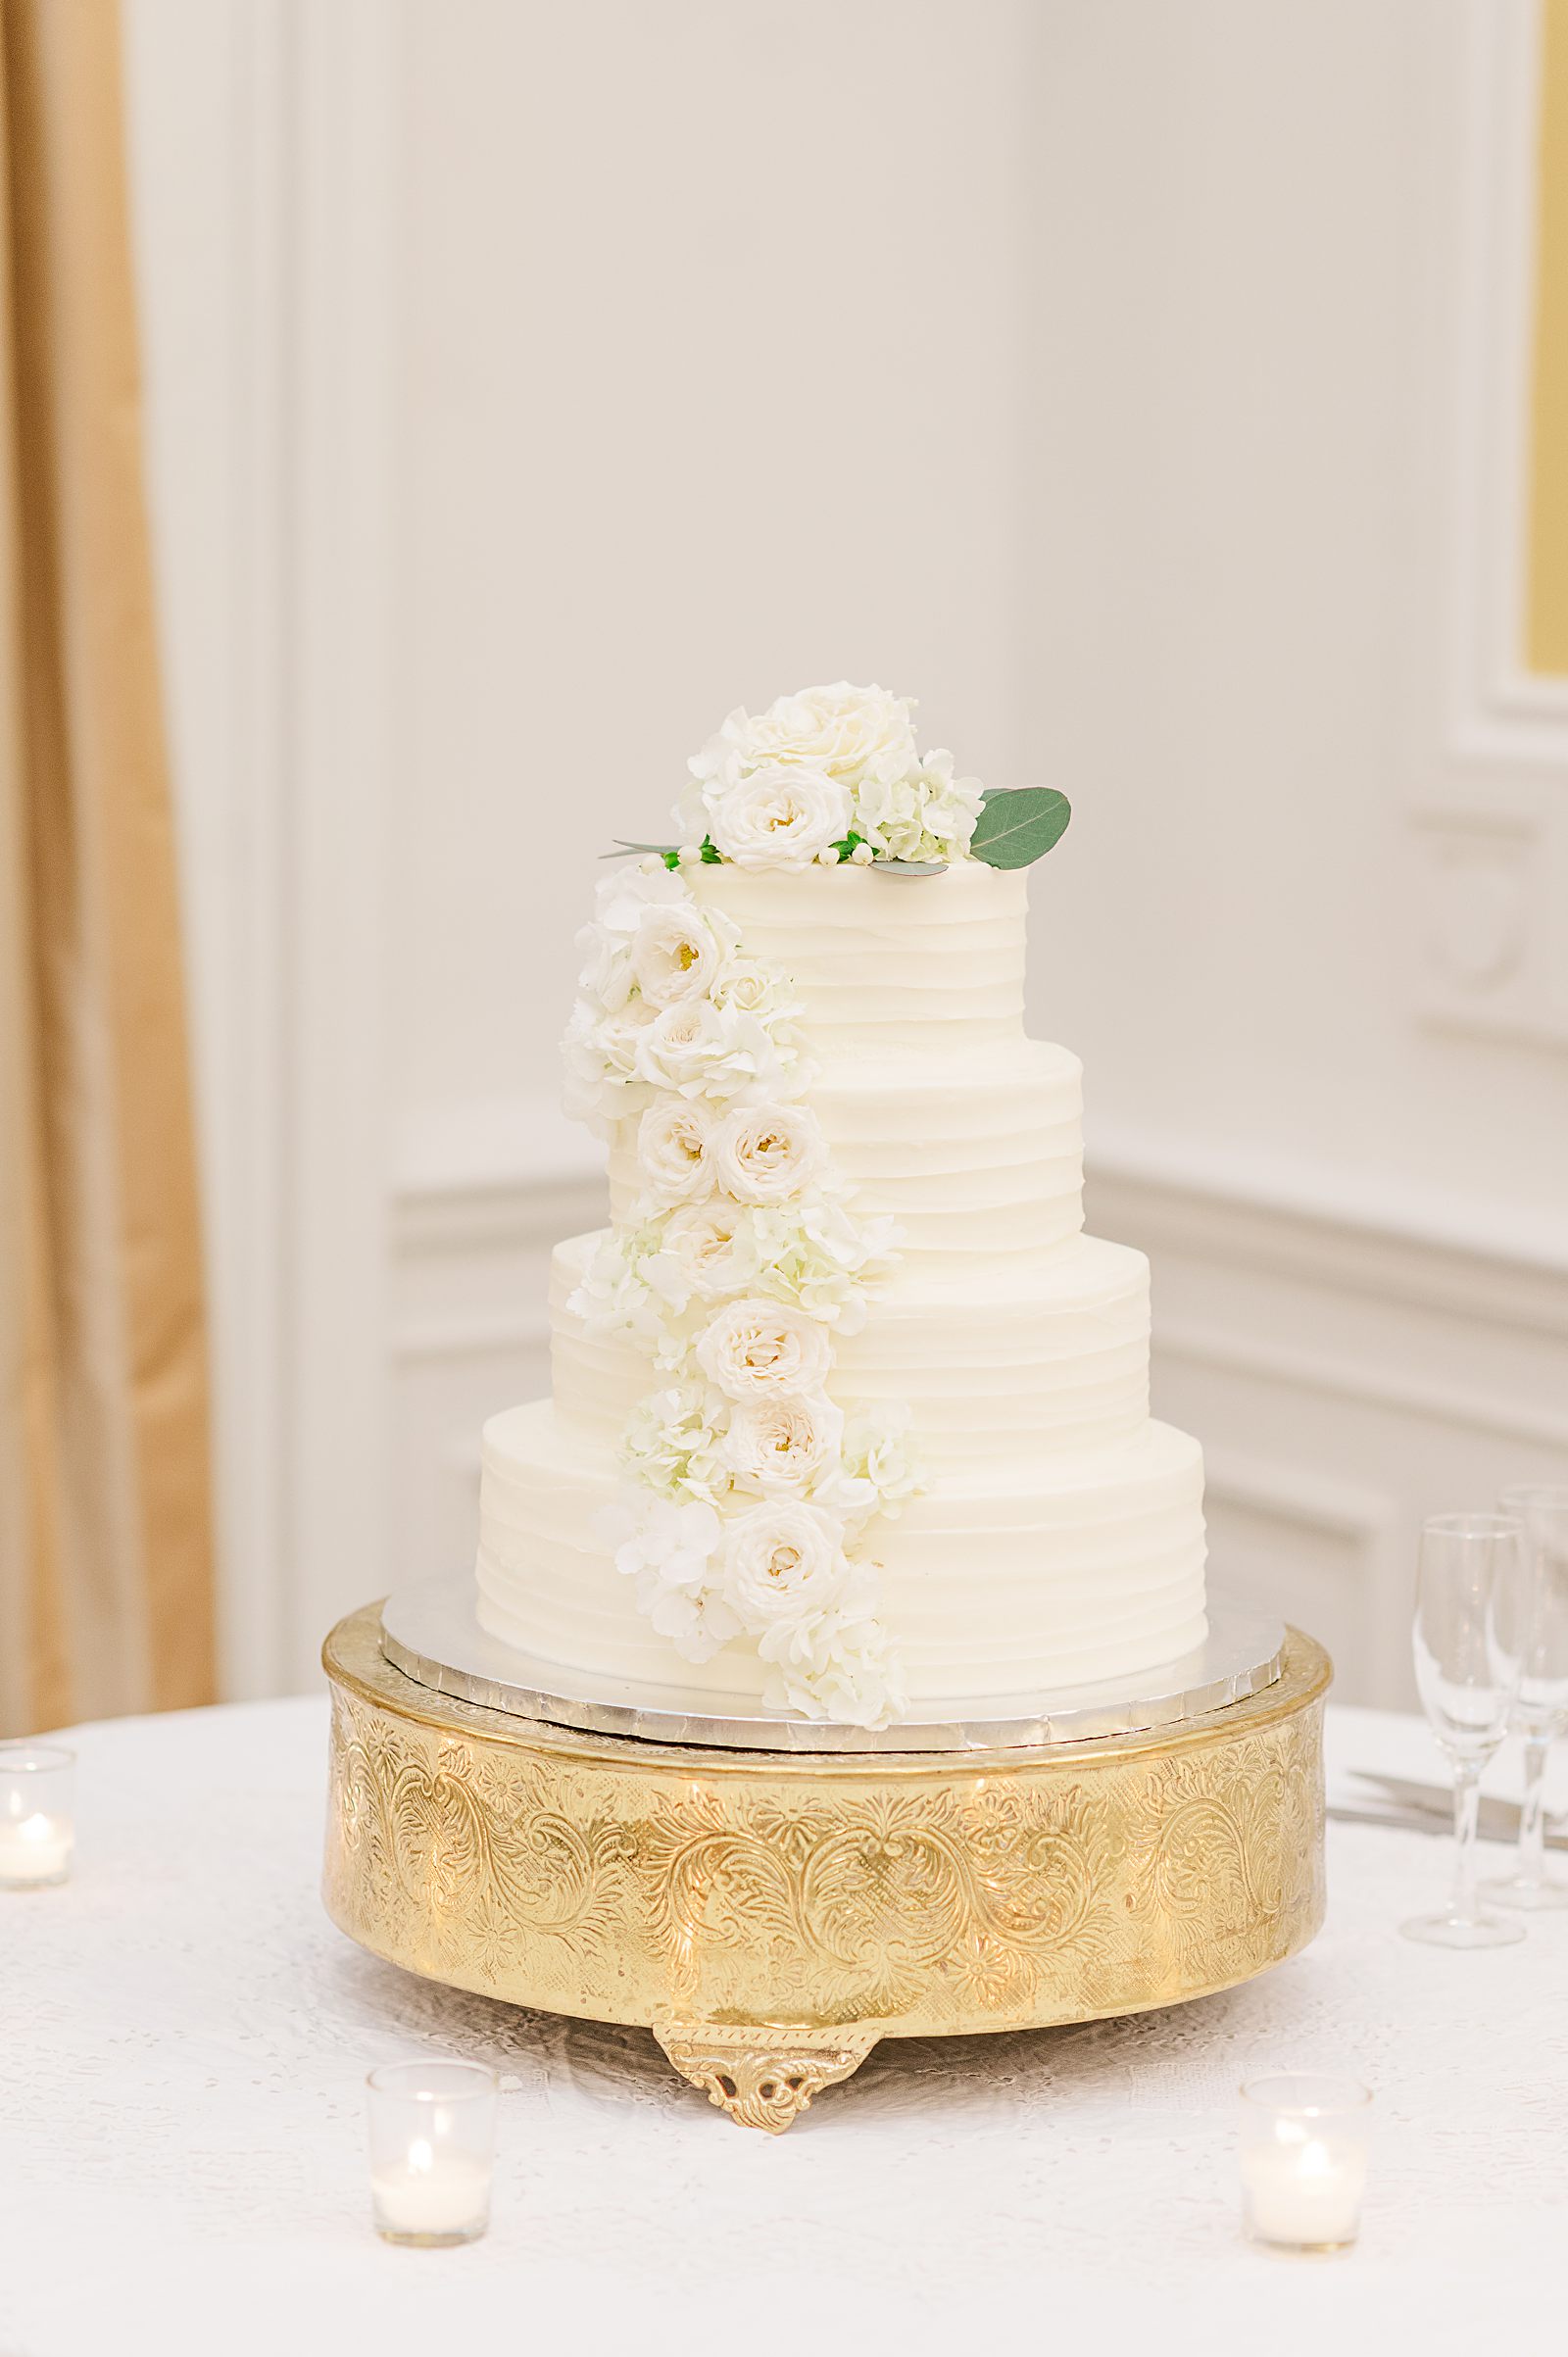 Wedding Cake by The Mixing Bowl RVA at Jefferson Hotel Wedding. Richmond Wedding Photographer Kailey Brianne Photography